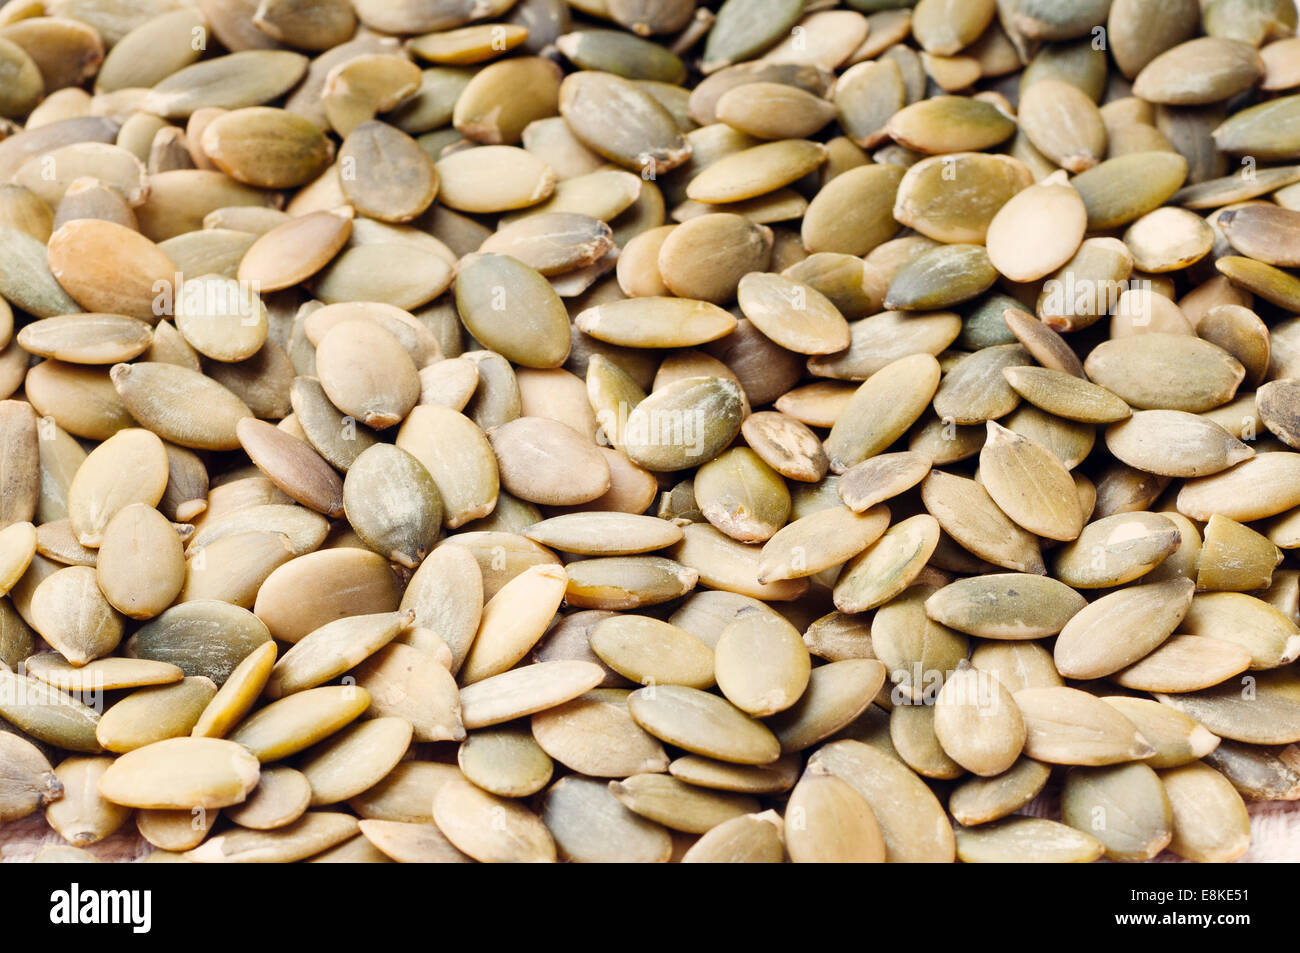 pumpkin seeds, agricultural commodity natural Stock Photo